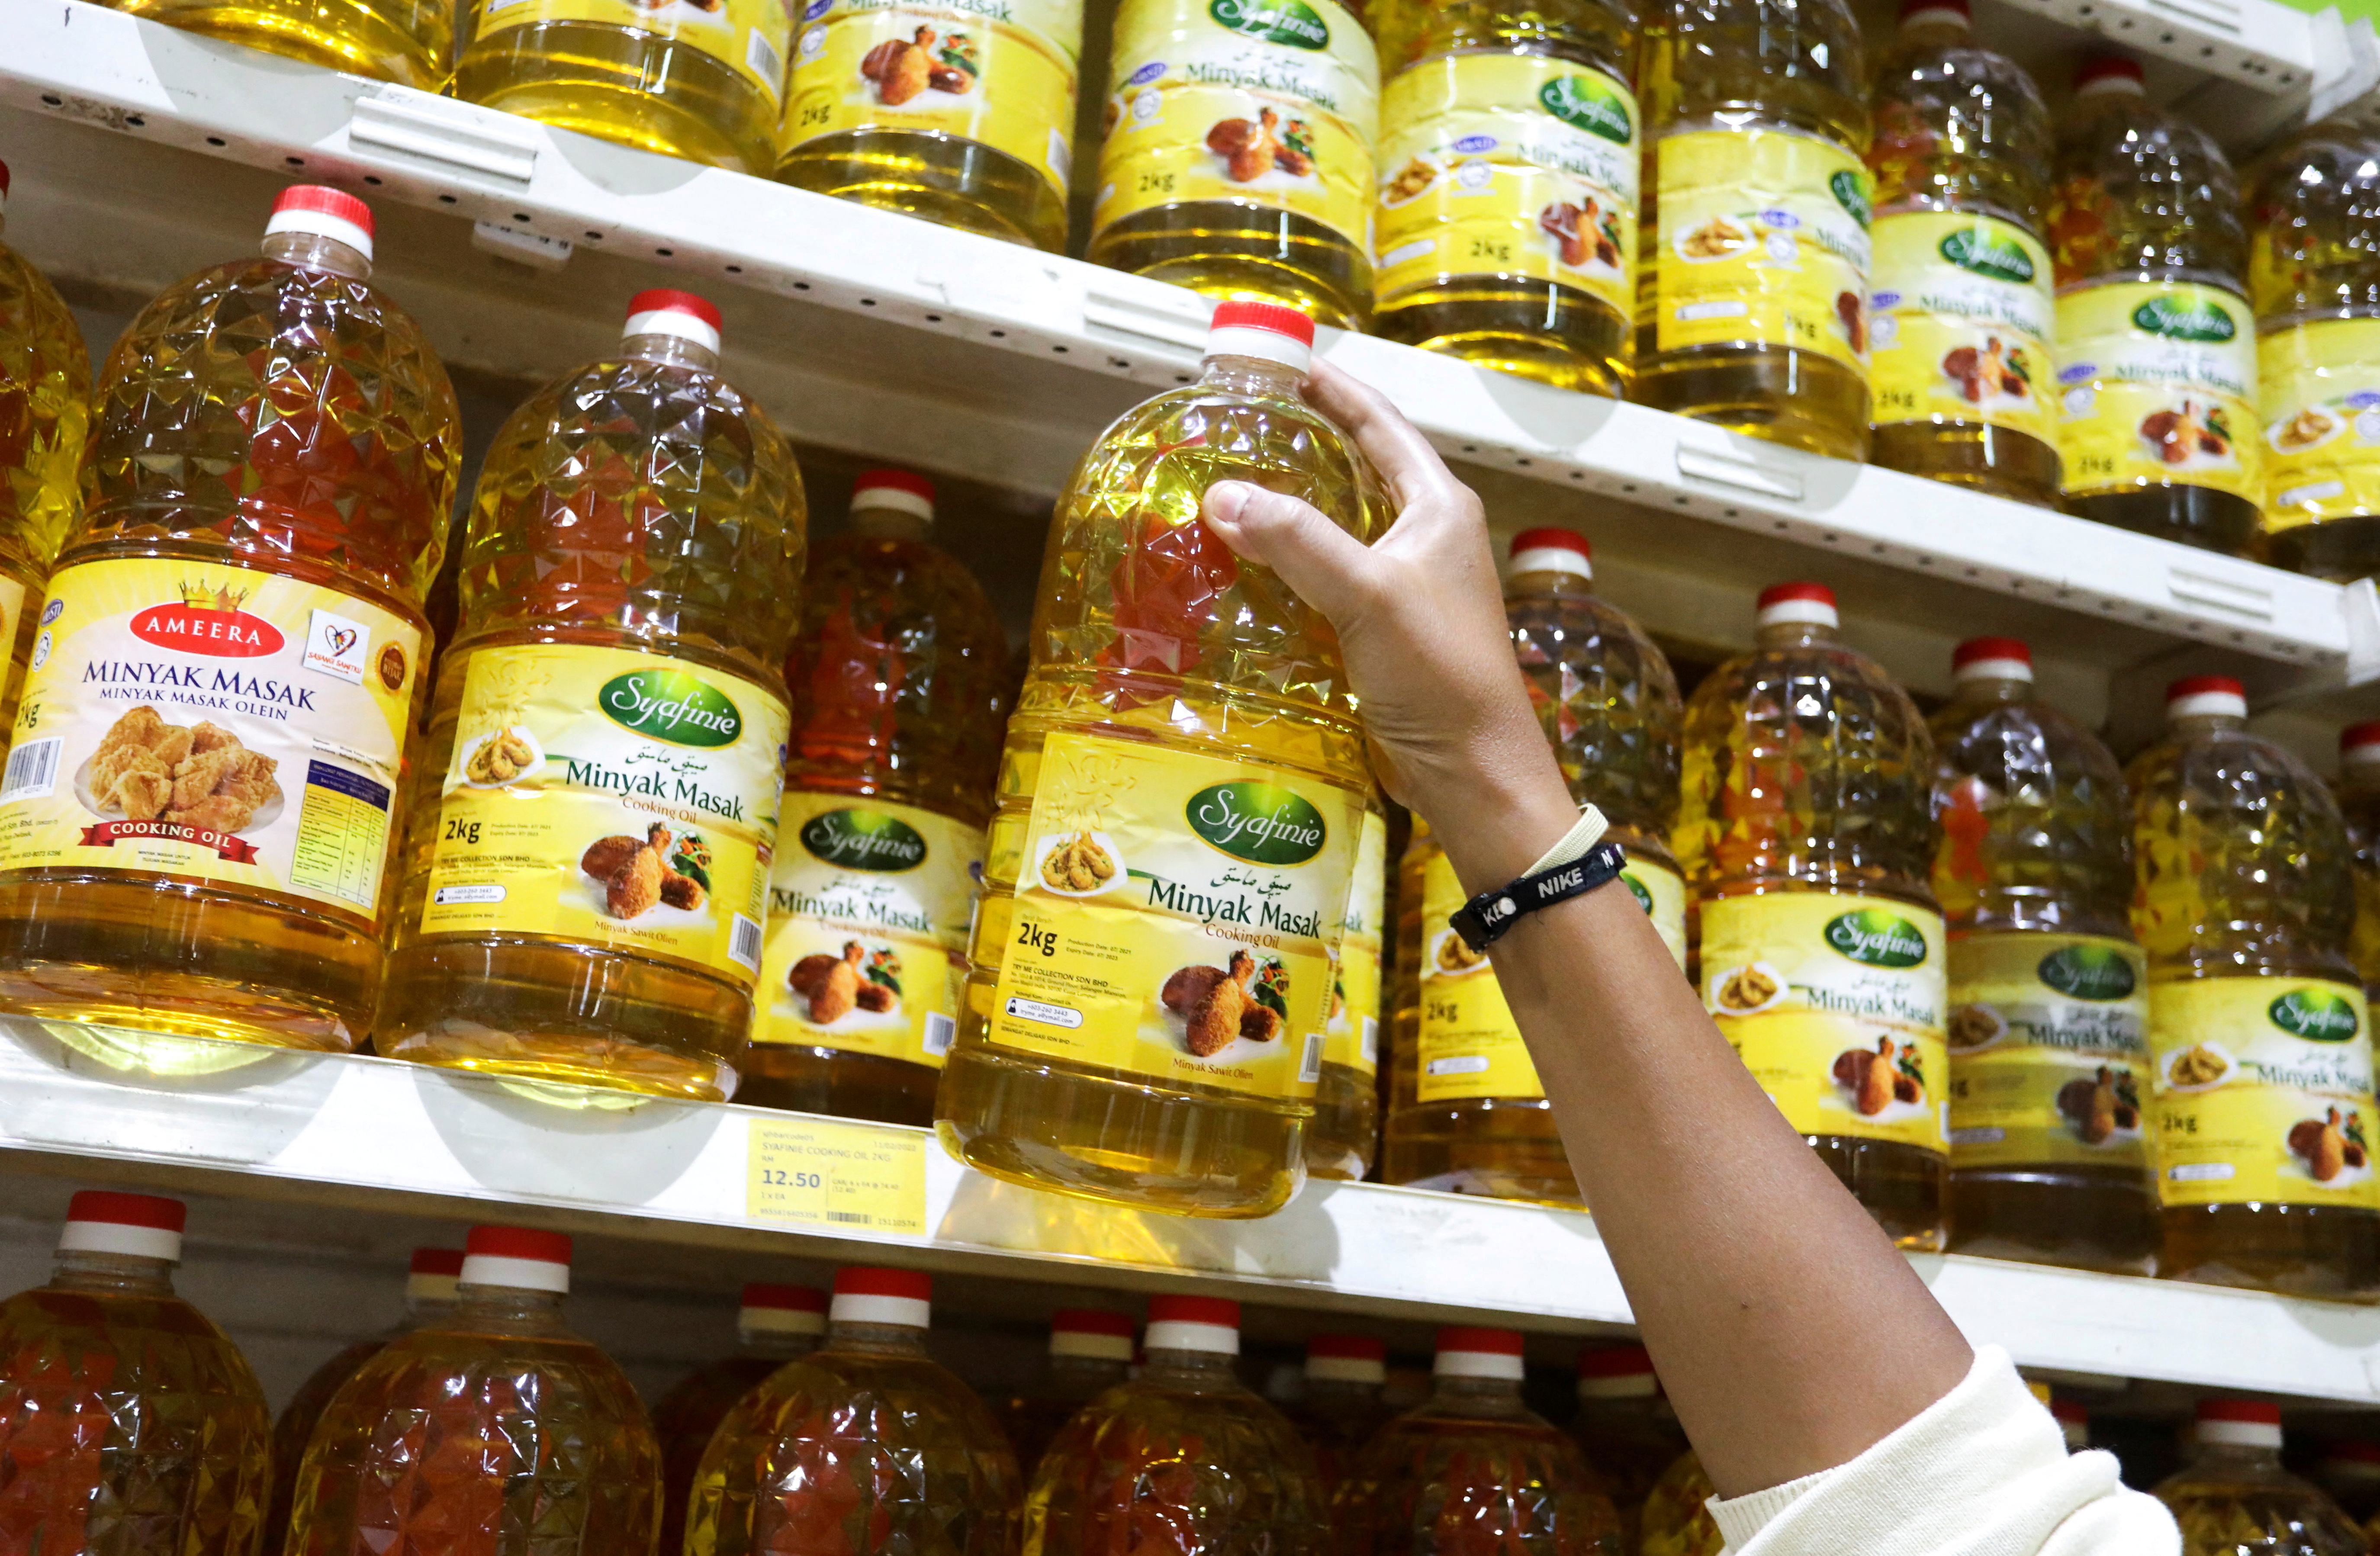 Bottles of cooking oil made from oil palms are displayed at a supermarket in Subang Jaya